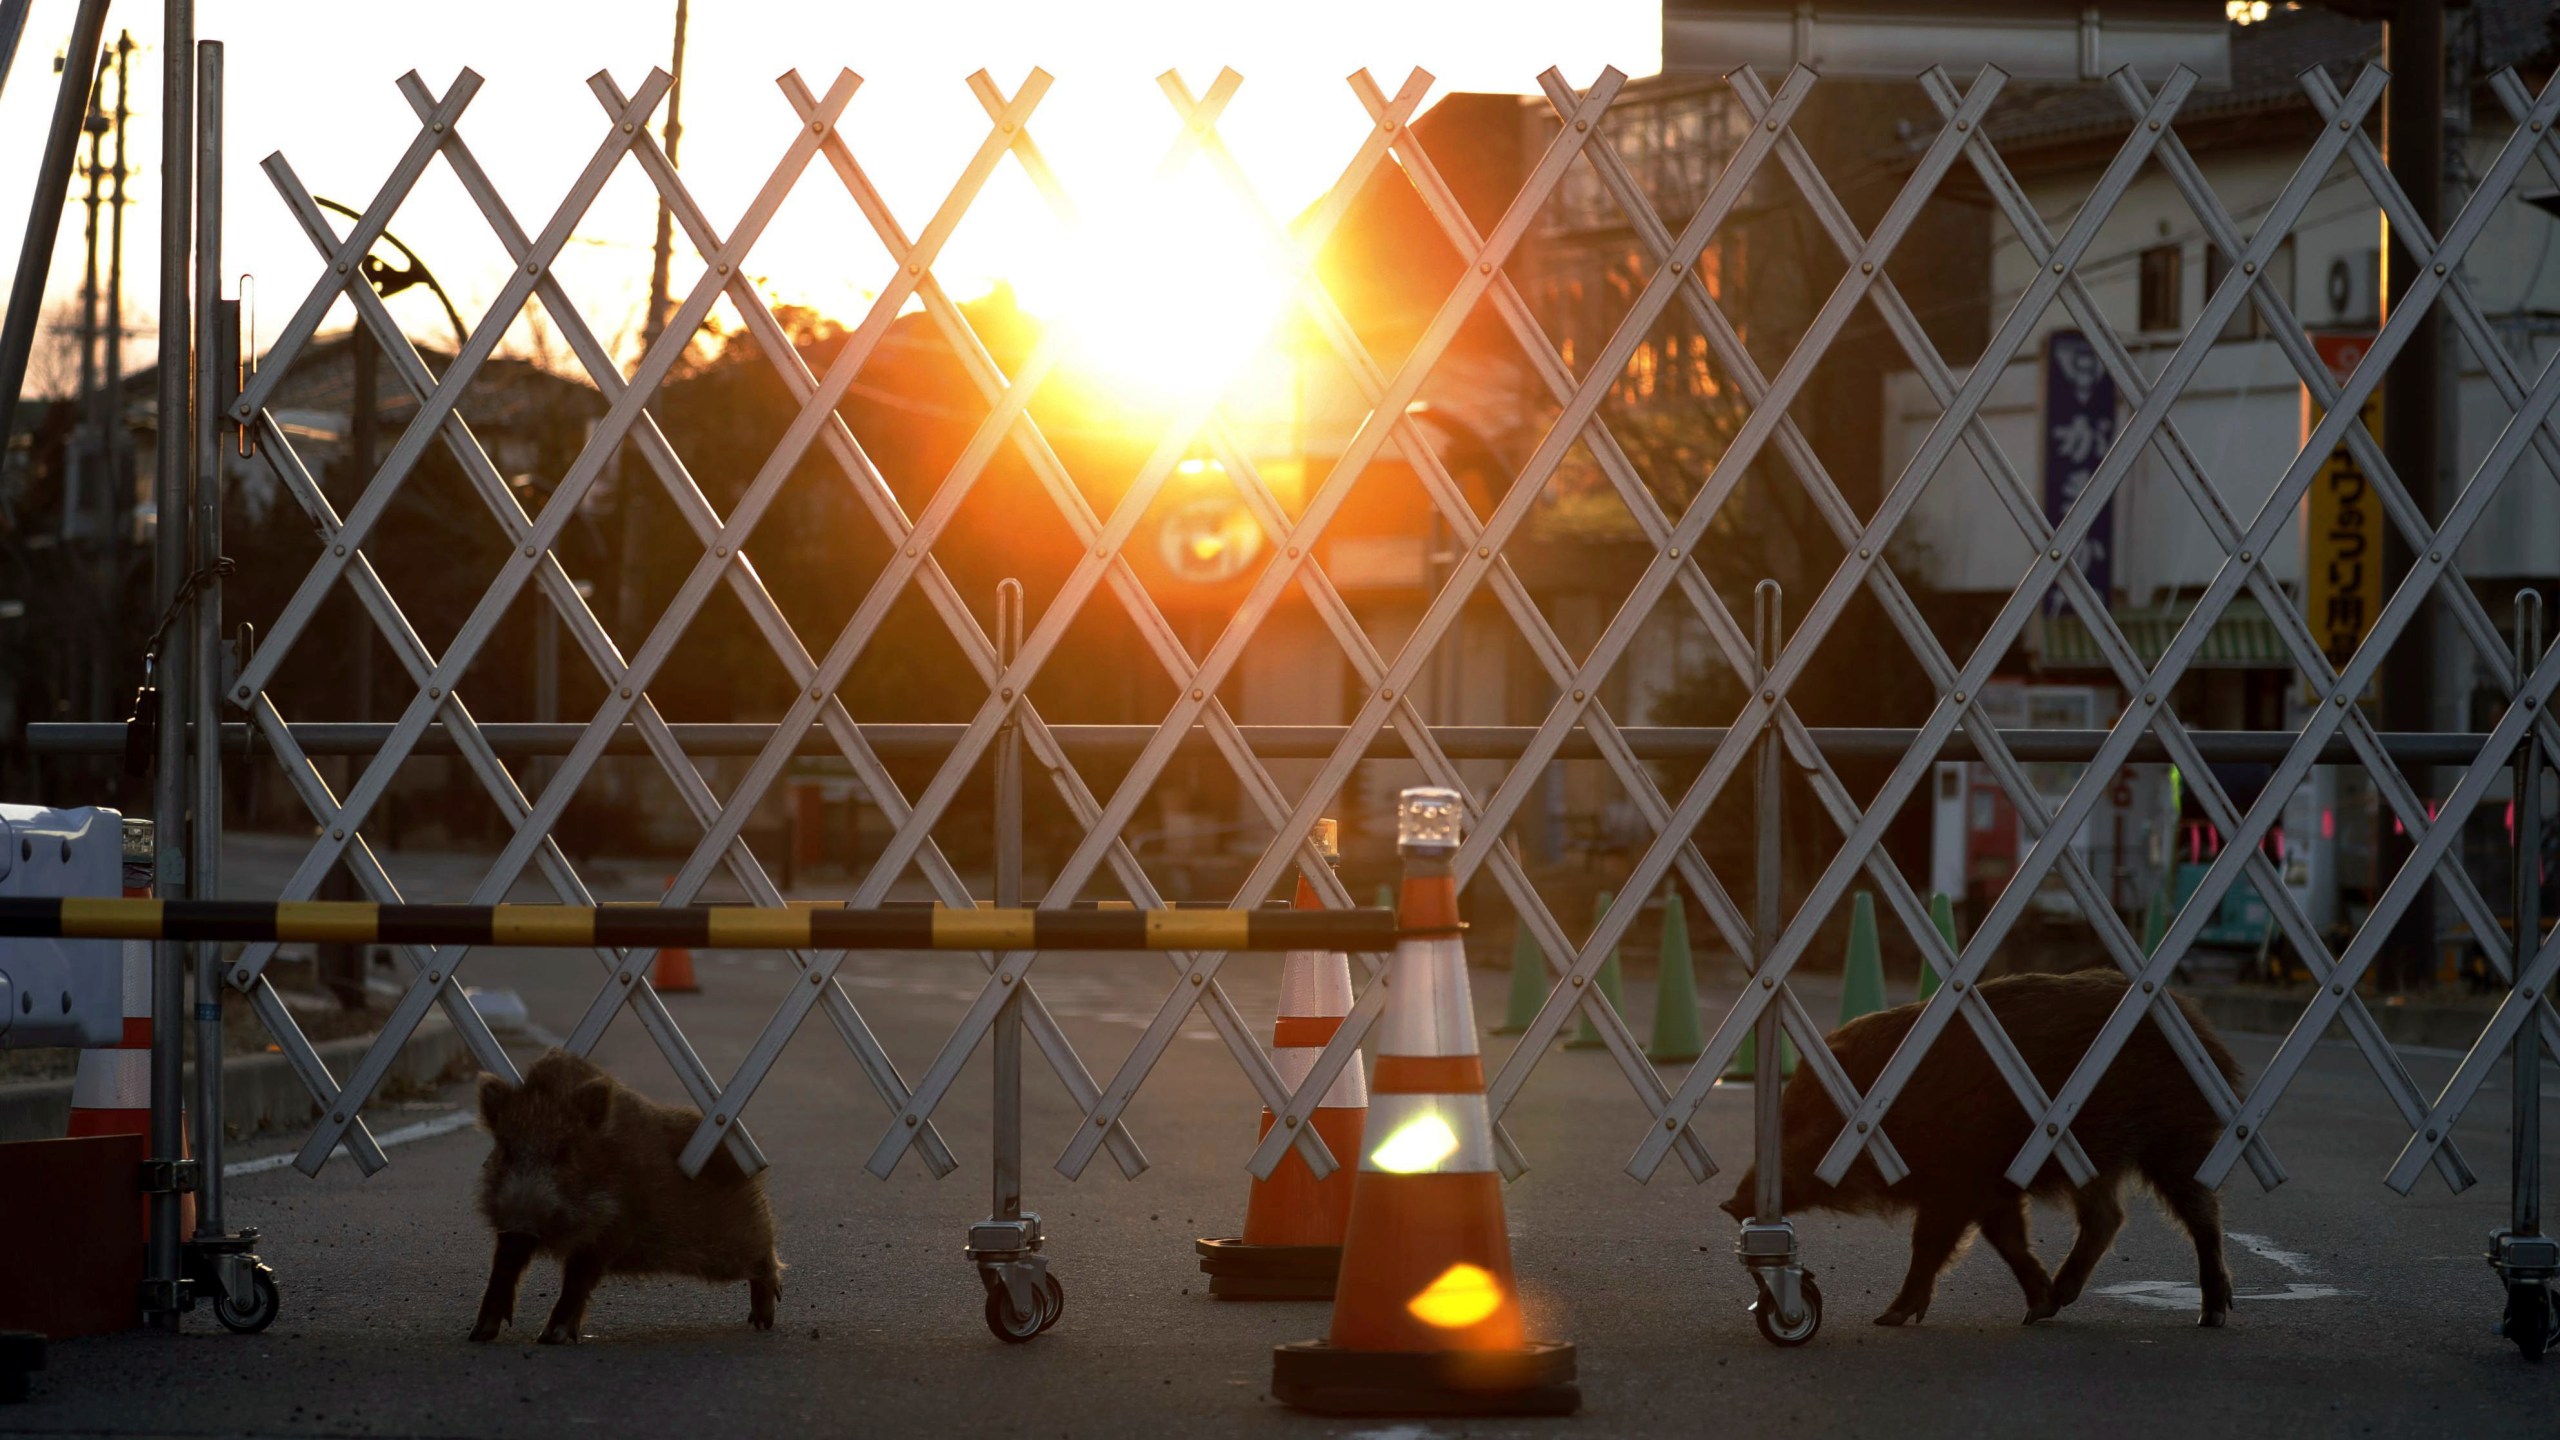 FILE - Boars roam near a barricade set up to restrict the entry to difficult-to-return zones in Futaba, near the tsunami-crippled Fukushima Dai-ichi nuclear plant, Fukushima prefecture, Japan, on March 11, 2017. Japan on Monday, March 11, 2024, marked 13 years since a massive earthquake and tsunami hit the country’s northern coasts. (Kota Endo/Kyodo News via AP, File)